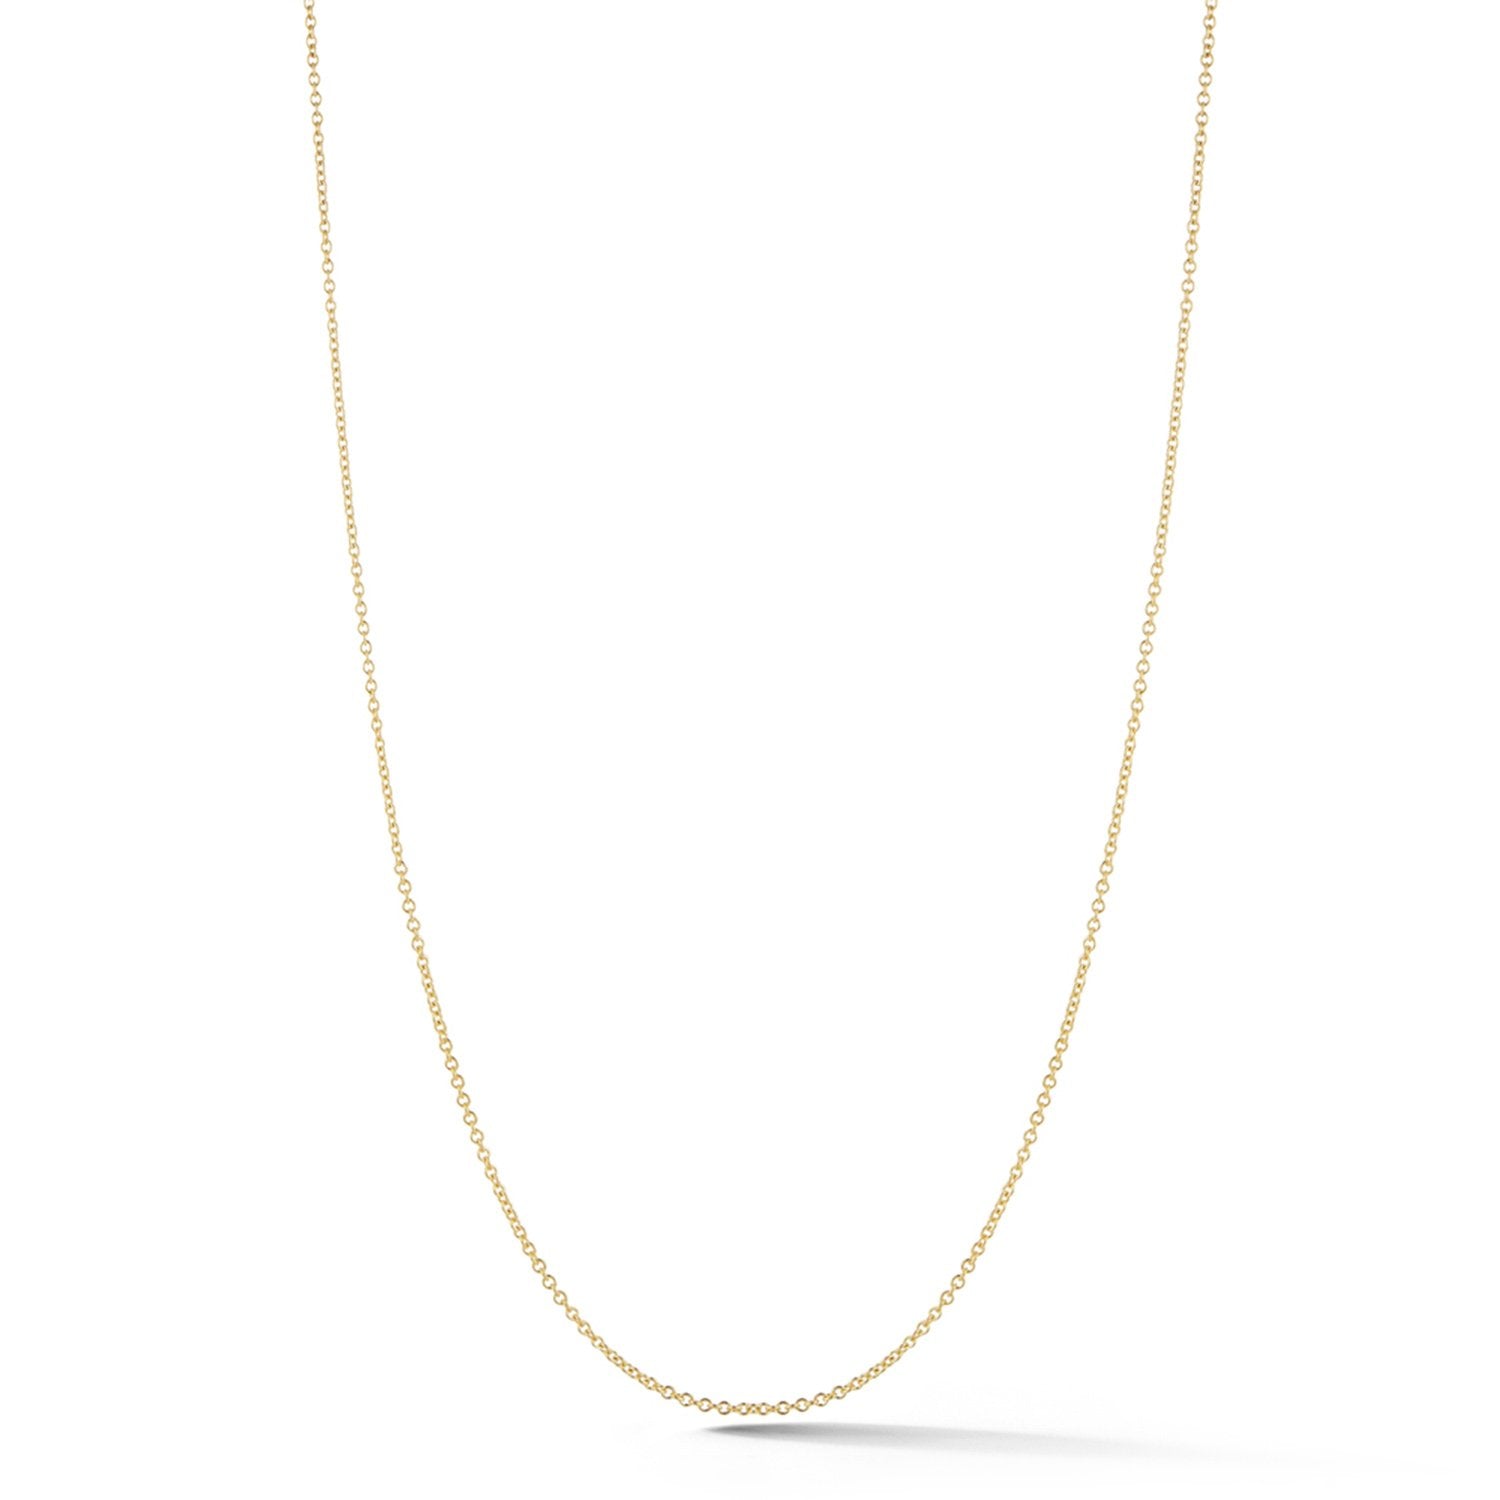 Cable Link Chain Necklace in 18K Yellow Gold